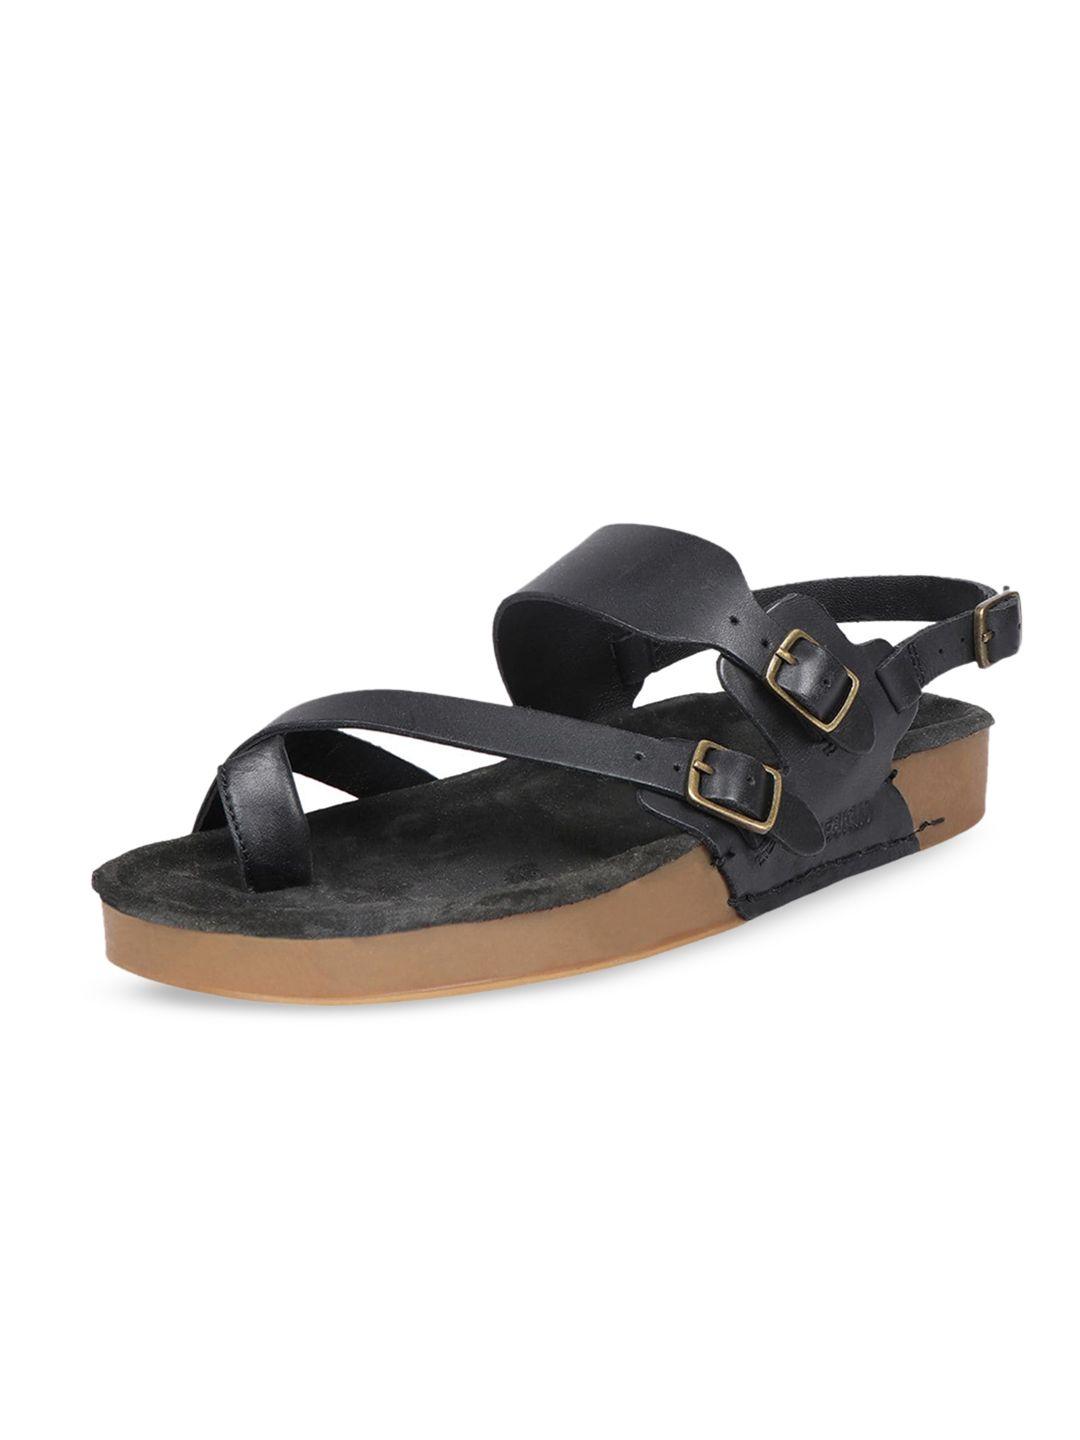 hidesign port blair leather one toe flats with buckles